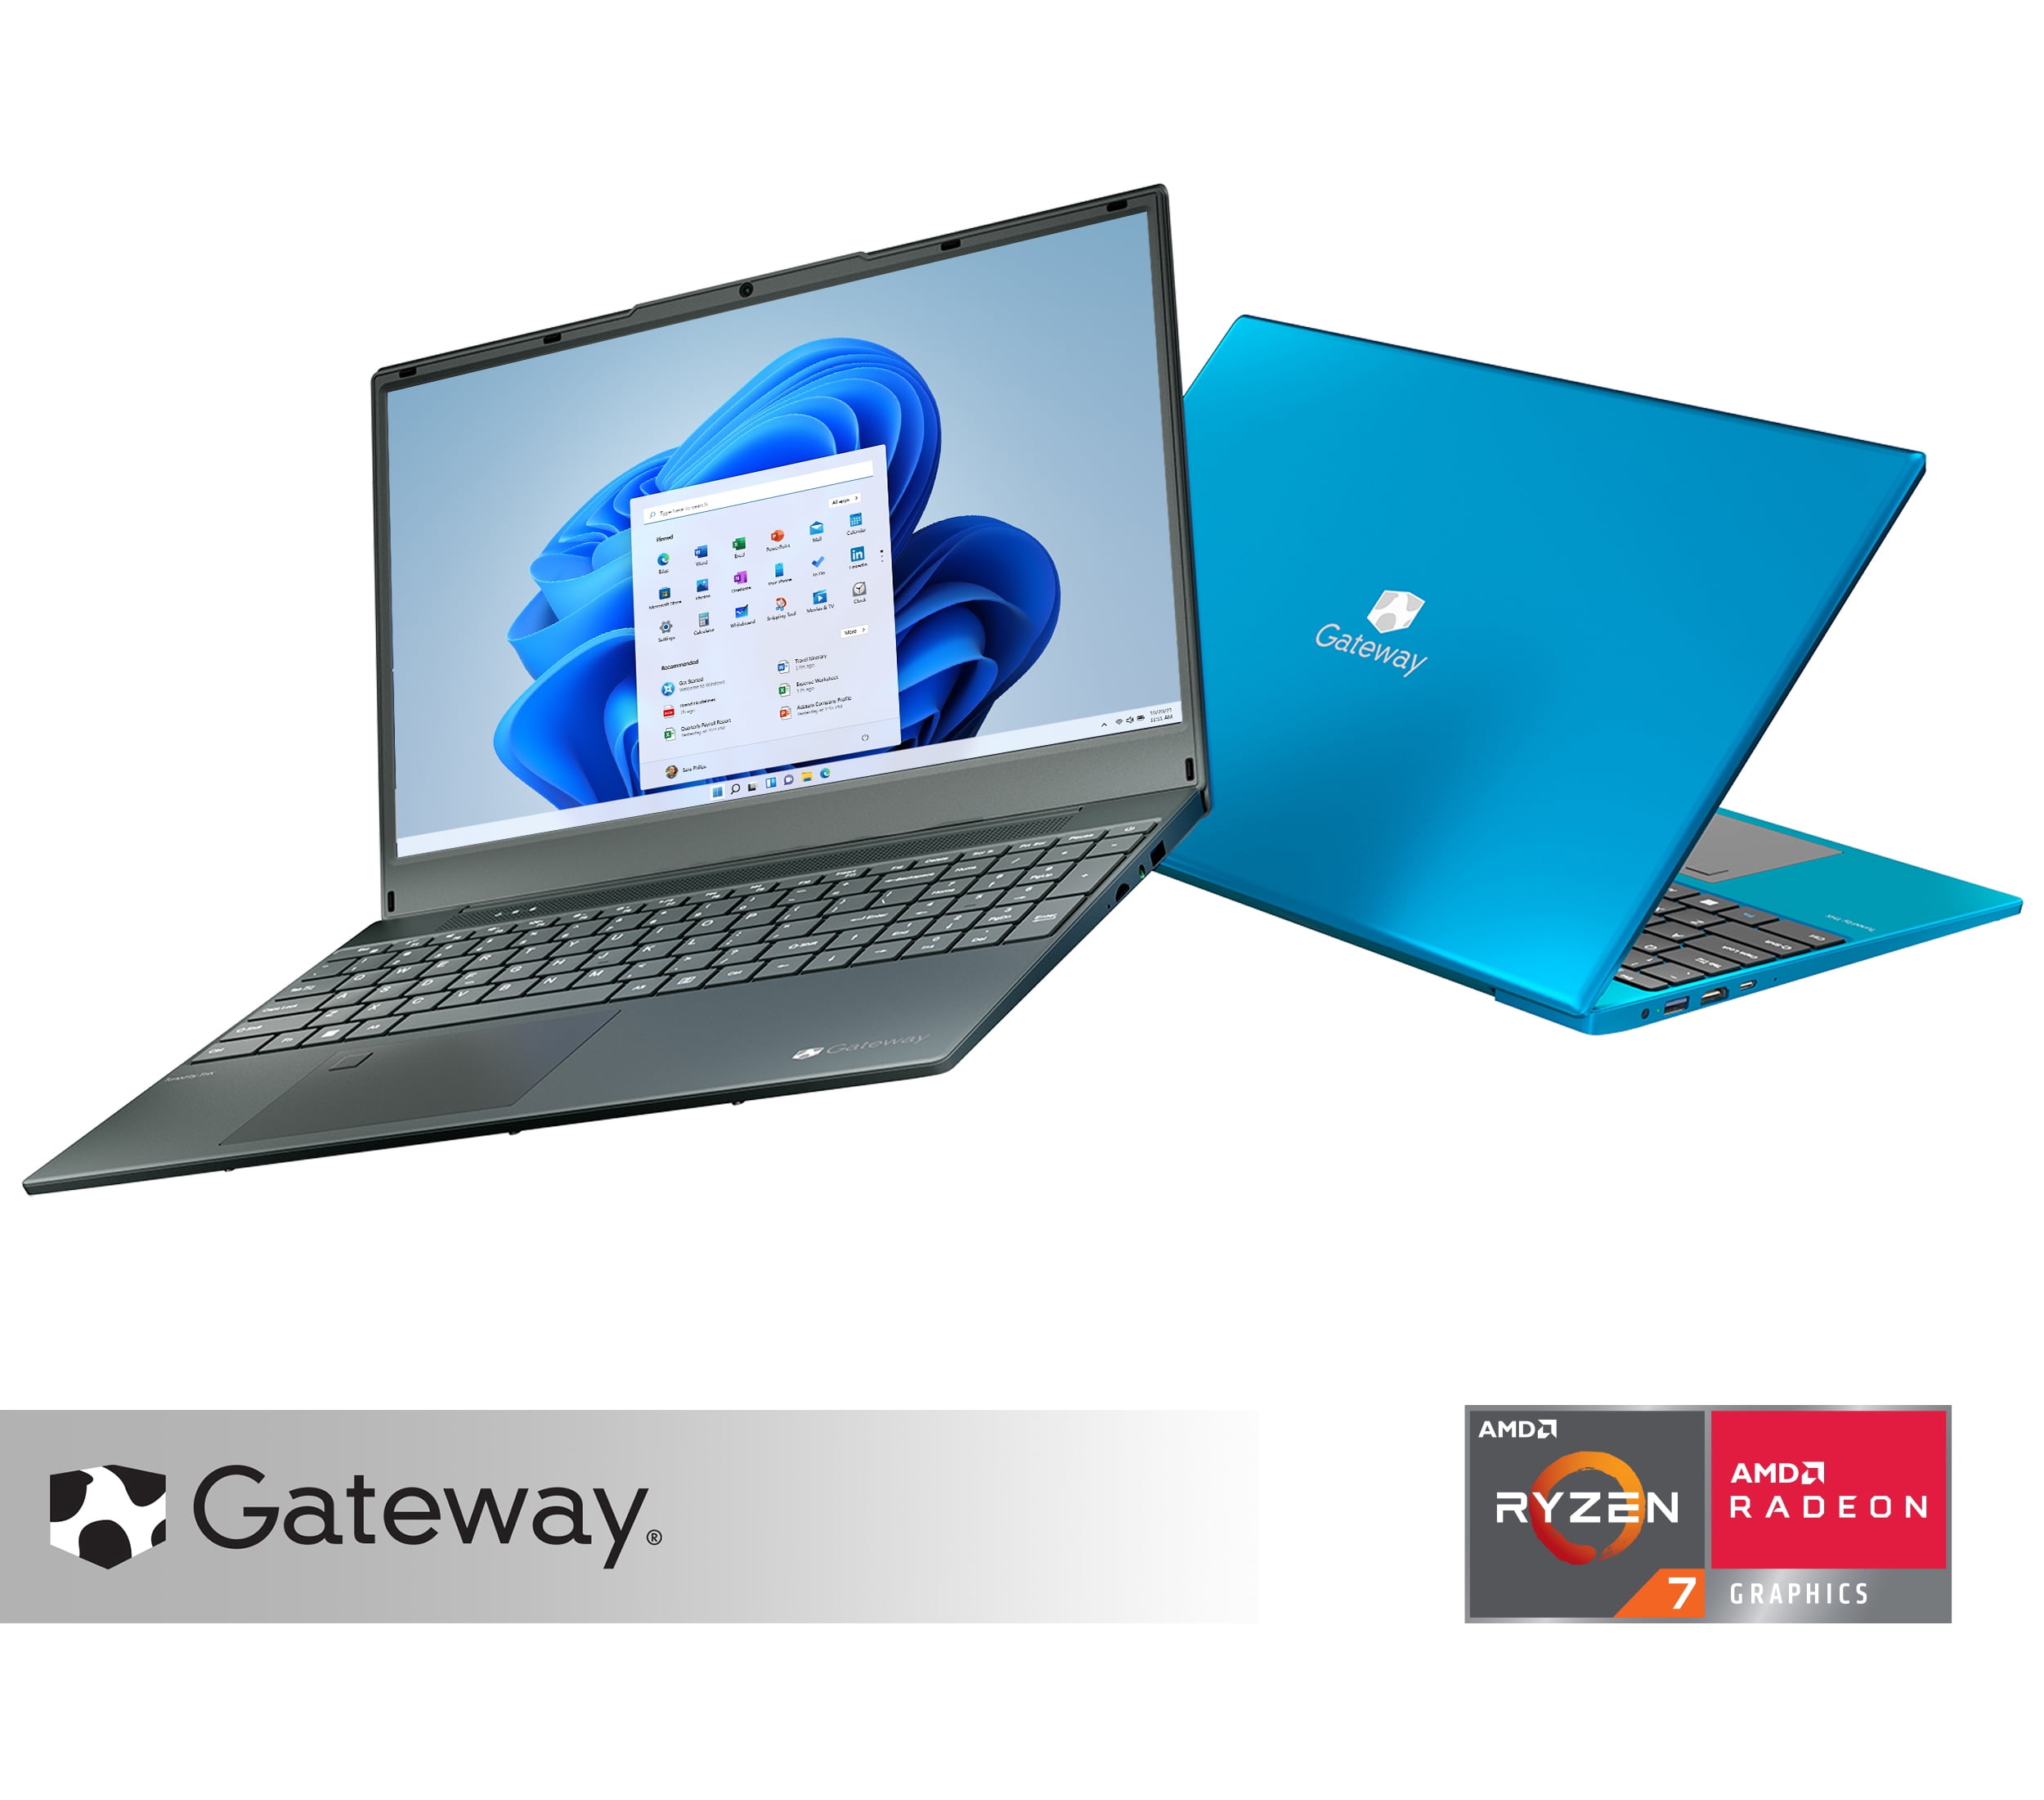 lecture Privileged Does not move Gateway 15.6" Ultra Slim Notebook, FHD, AMD Ryzen 7 with Radeon RX Vega 10  Graphics, 512GB SSD, 8GB Memory, Tuned by THX Audio, Fingerprint Scanner,  2MP Camera, HDMI, Windows 11 Home, Blue - Walmart.com